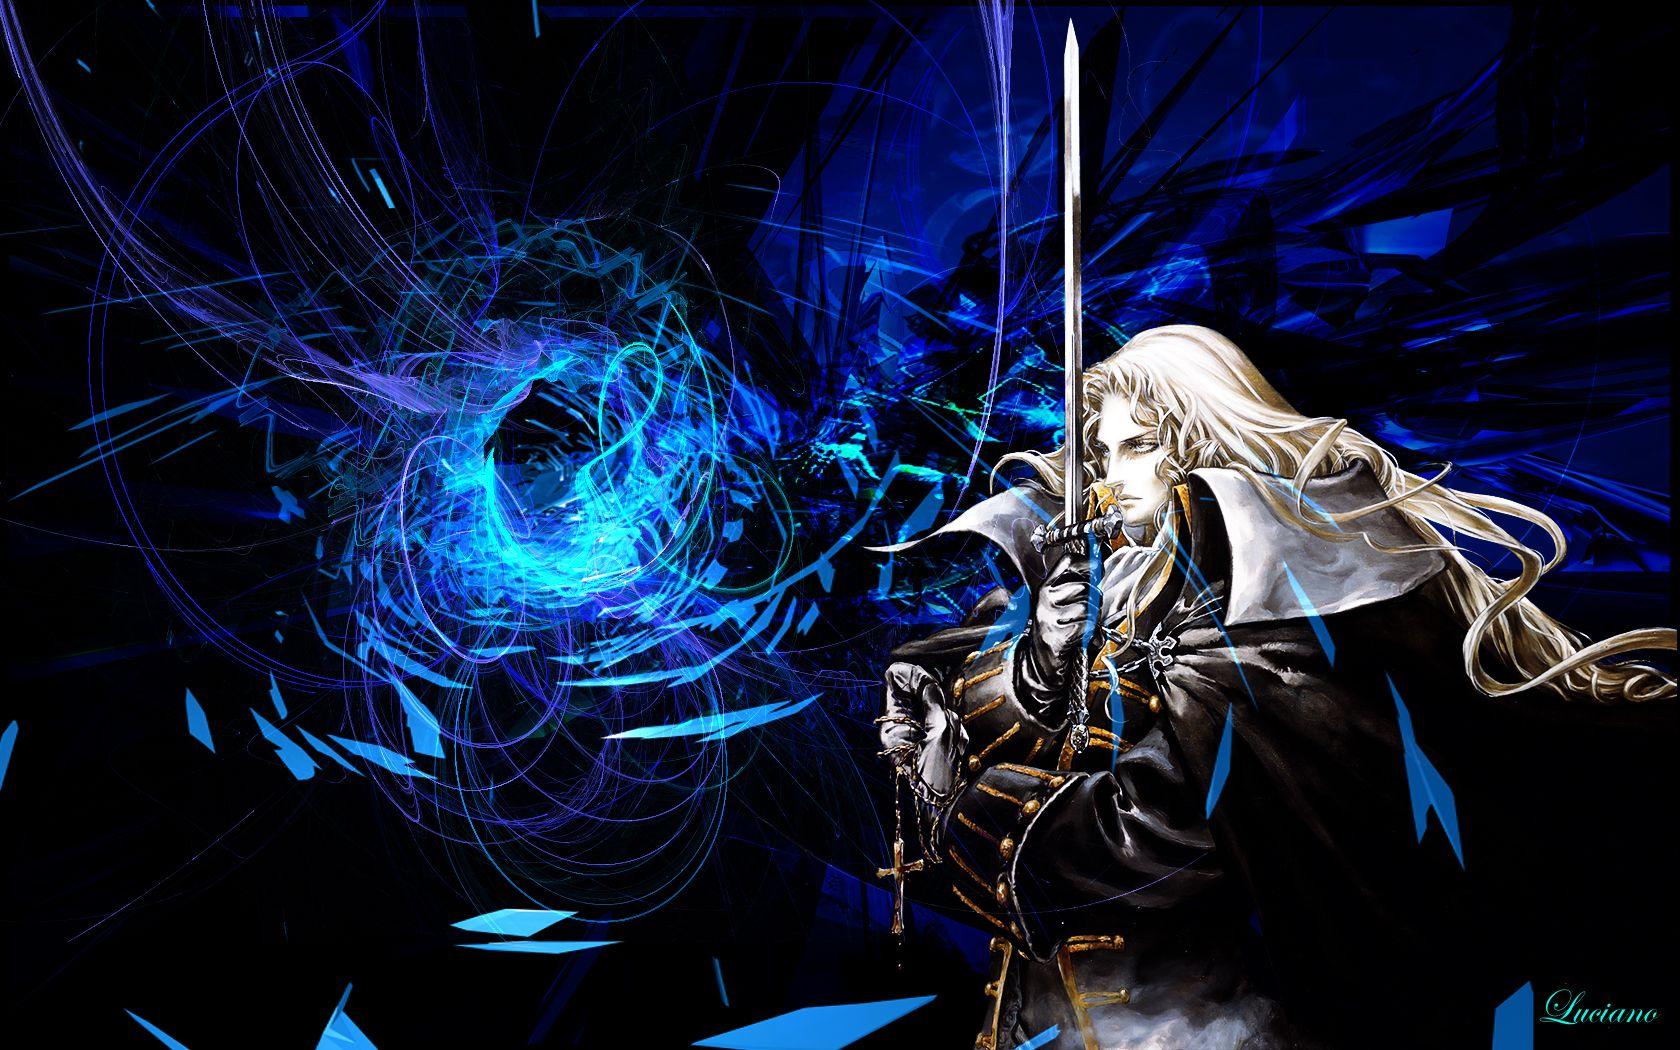 Castlevania: Symphony of the Night Wallpaper. Game Wallpaper